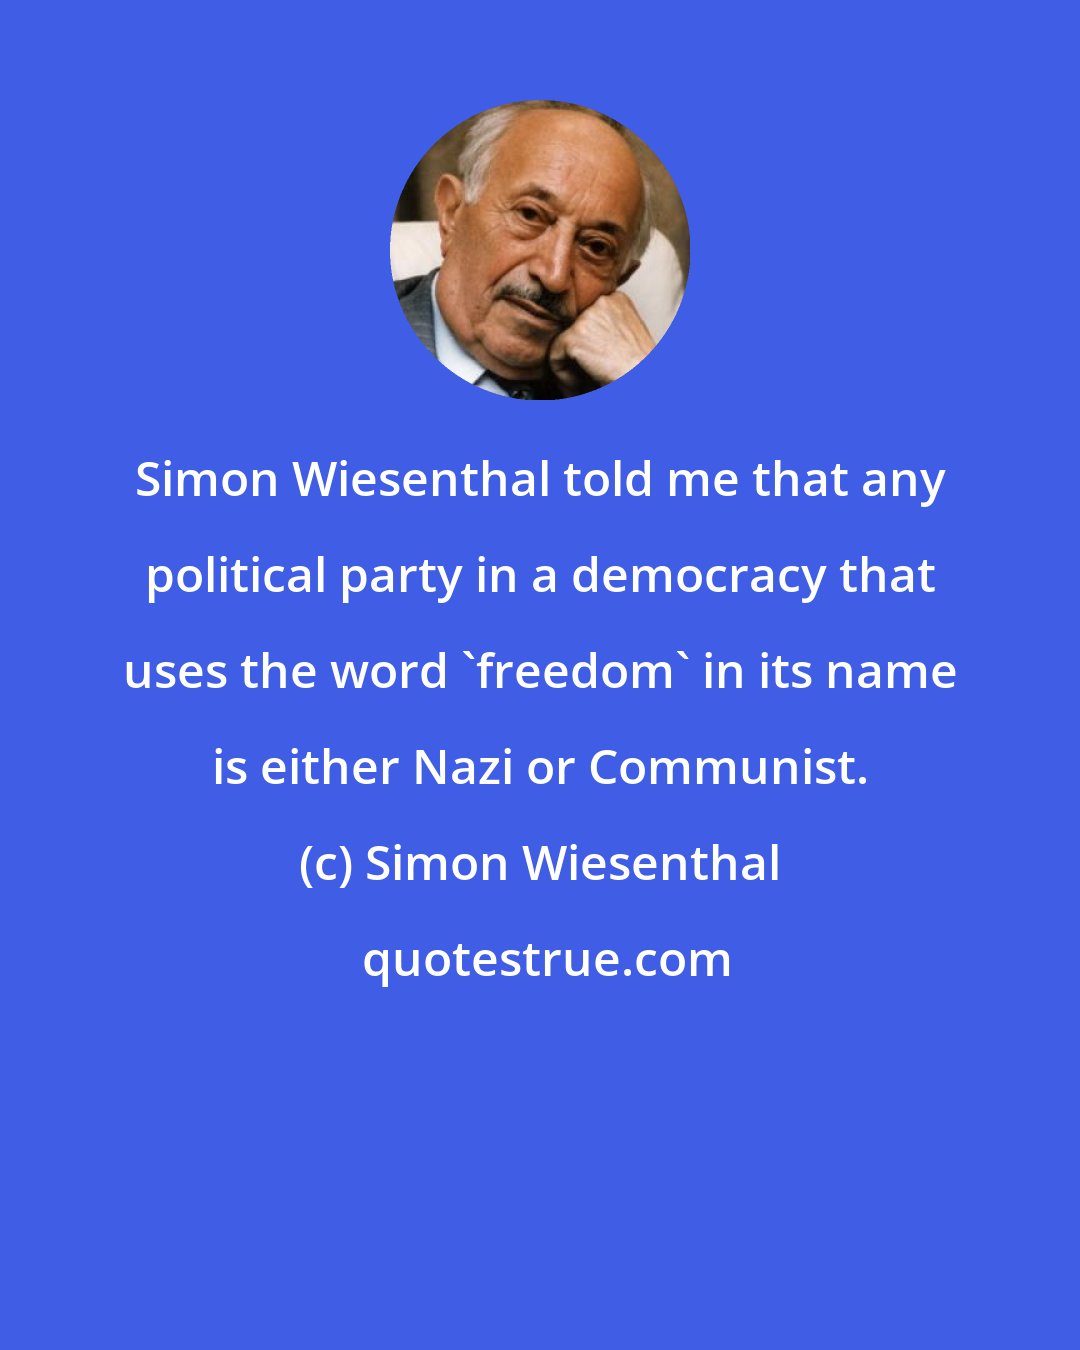 Simon Wiesenthal: Simon Wiesenthal told me that any political party in a democracy that uses the word 'freedom' in its name is either Nazi or Communist.